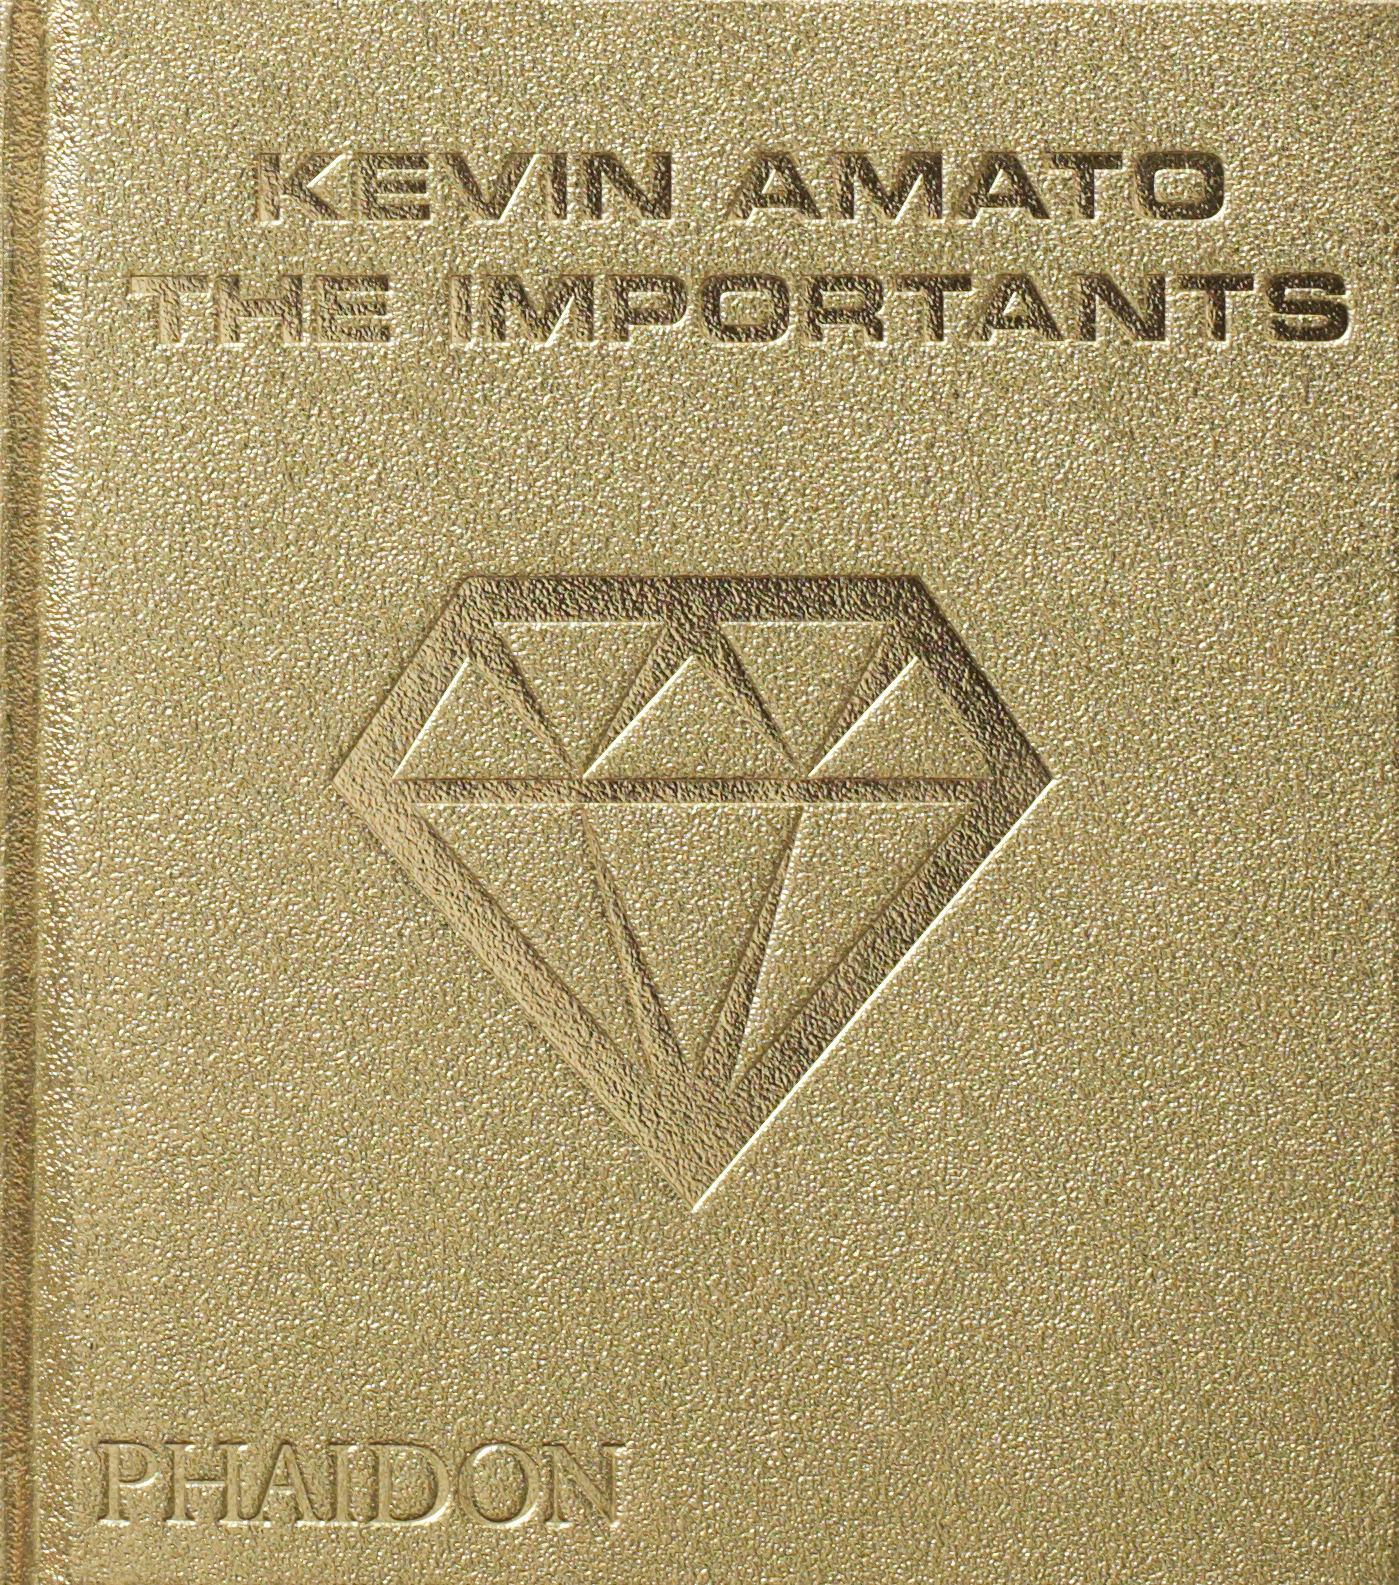 Contemporary Kevin Amato The Importants Book